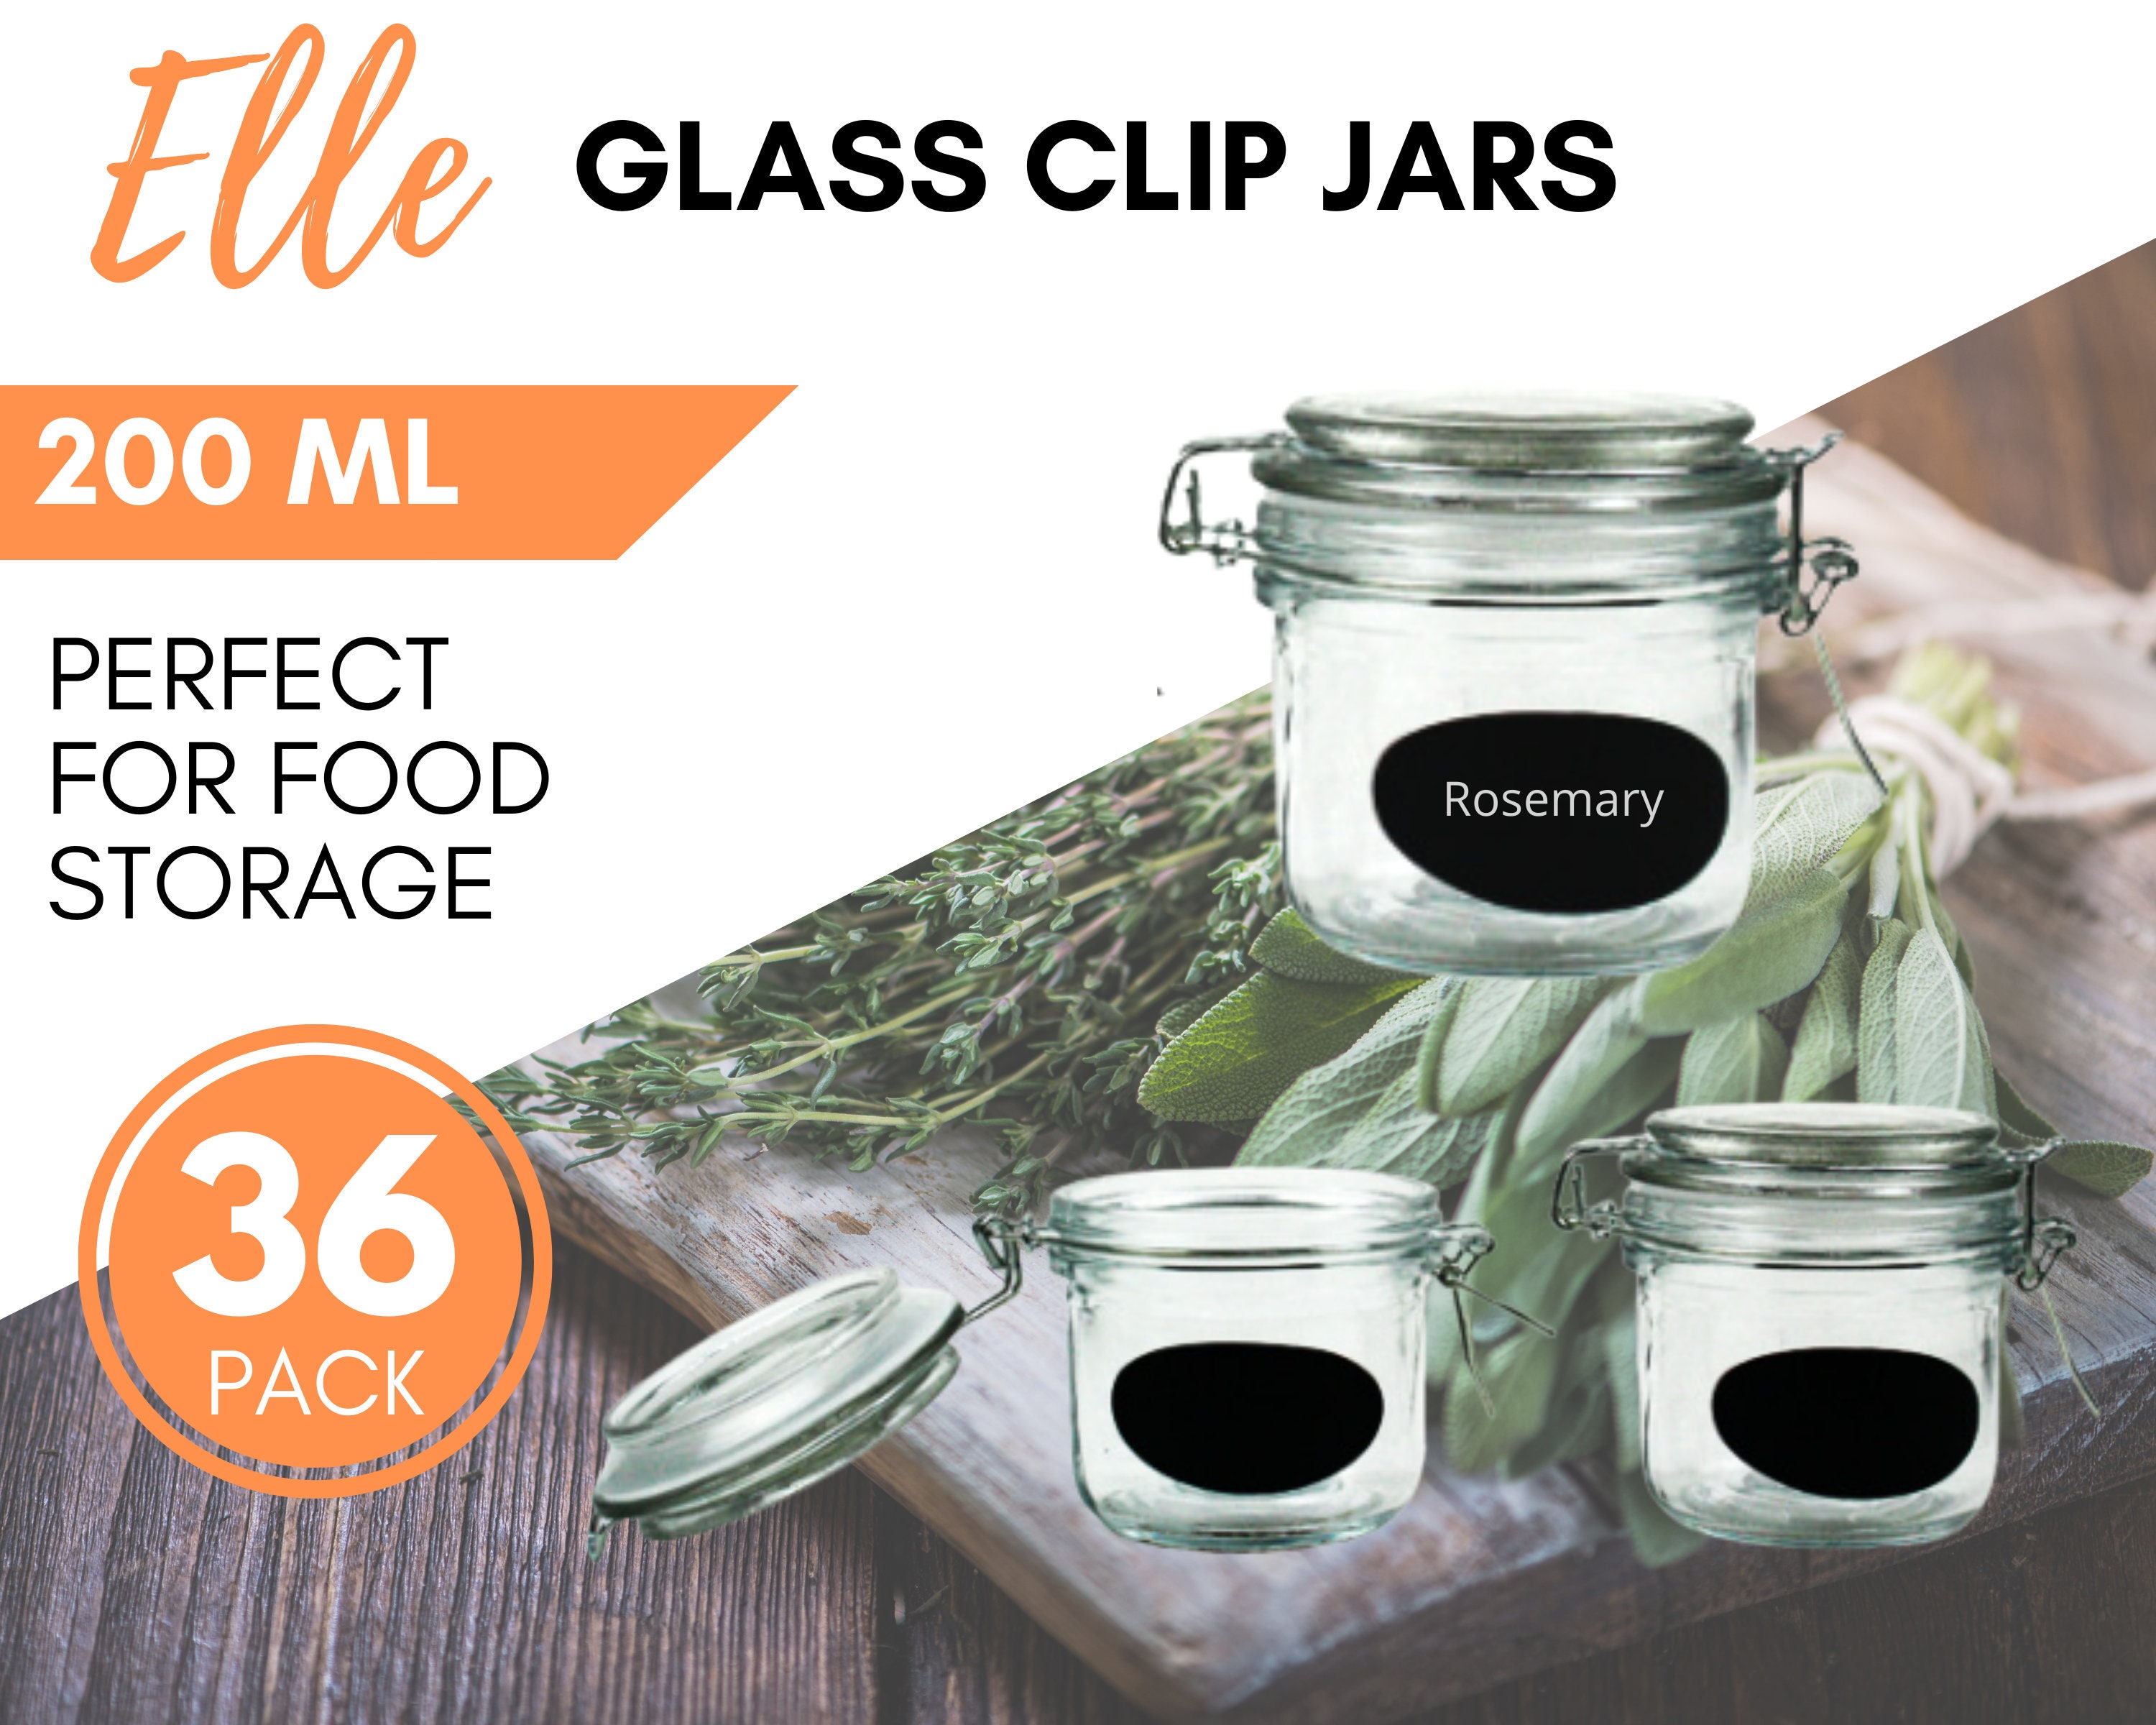 48 X Tilted Glass Spice Jar With Lids 200ml Small Round Glass Mason Jars  for Honey Jam Spices Canning Party Wedding Favours Bomboniere 